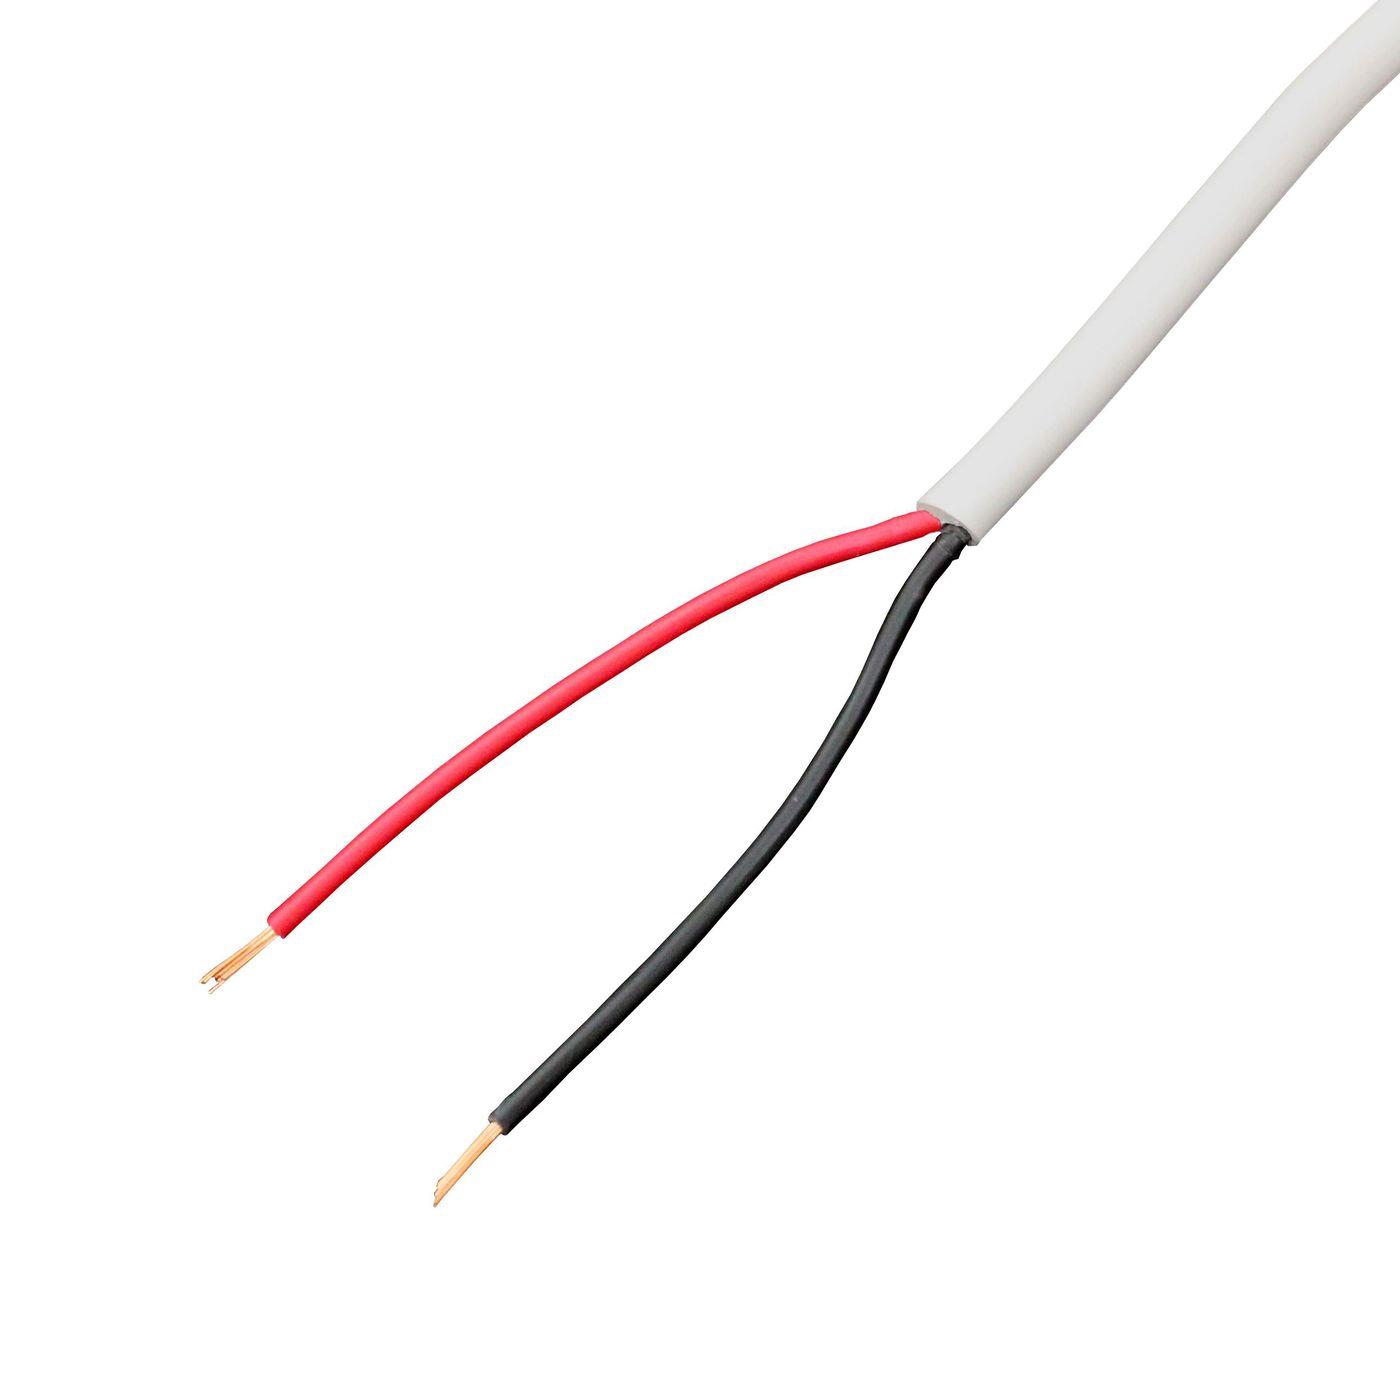 1m LED Control cable 2x 0,34mm² LiYY Extension 2 wire Power cable white